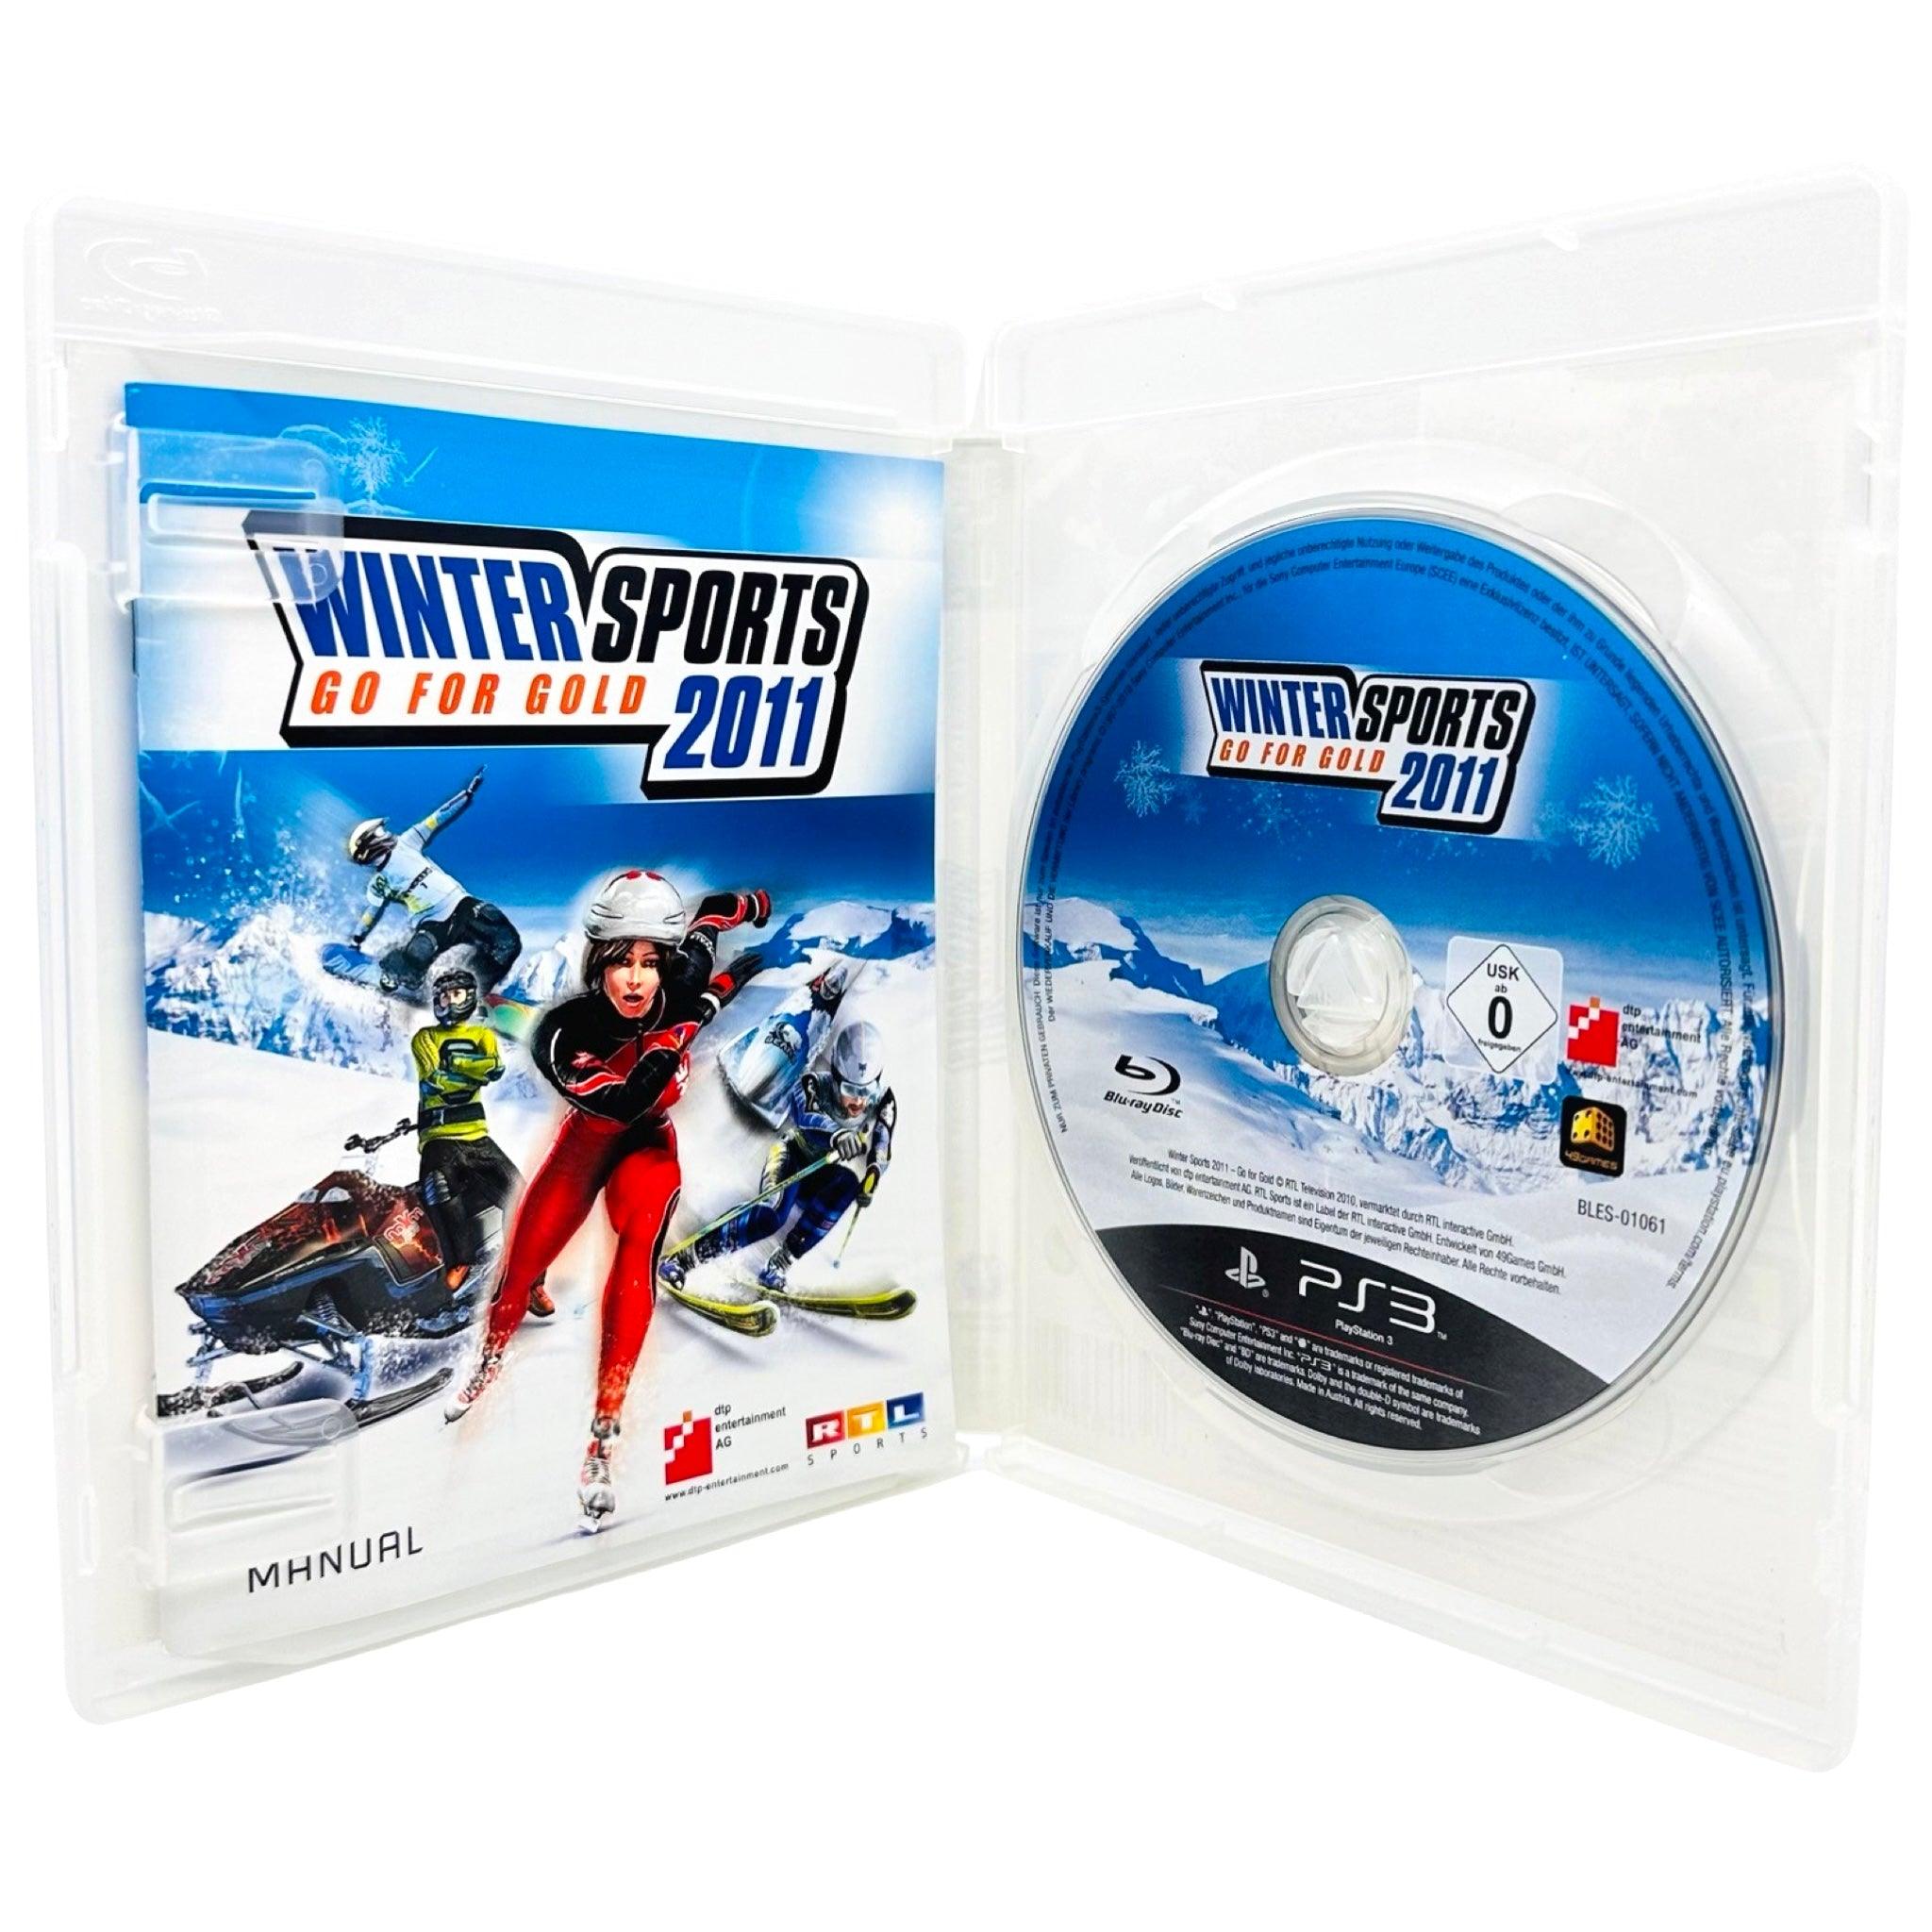 PS3: Winter Sports 2011: Go For Gold - RetroGaming.no